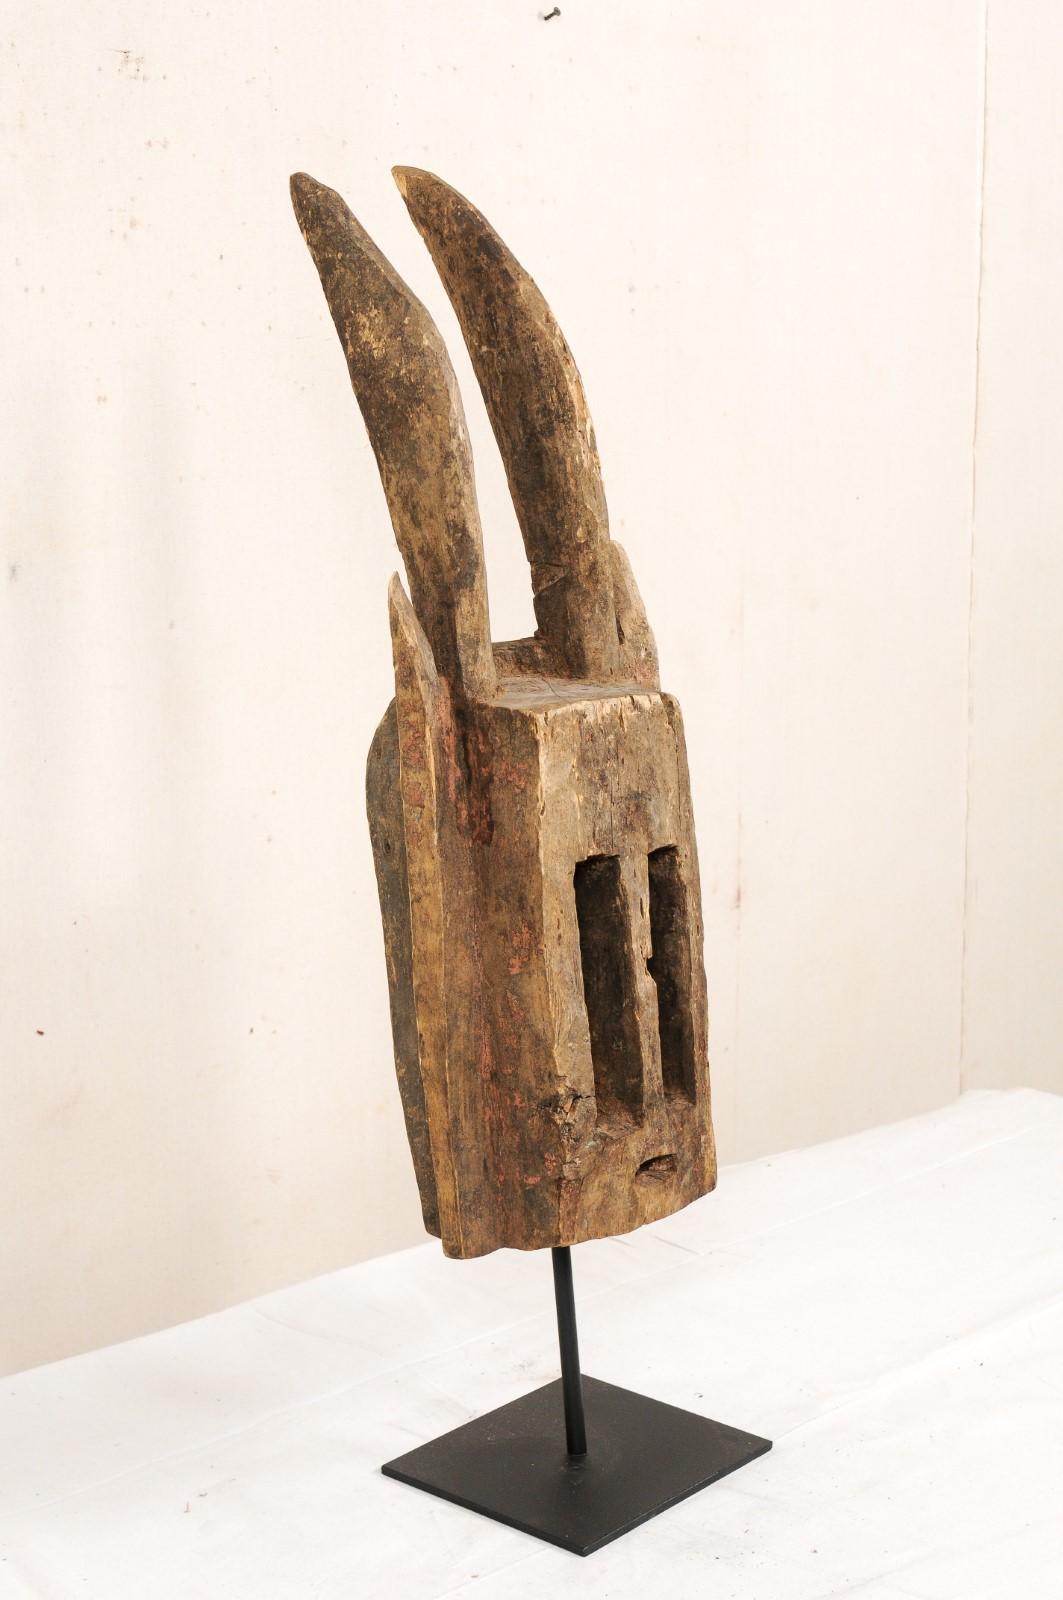 Malian A West African Dogon Tribe Antelope Ceremonial Dance Mask on Custom Iron Stand